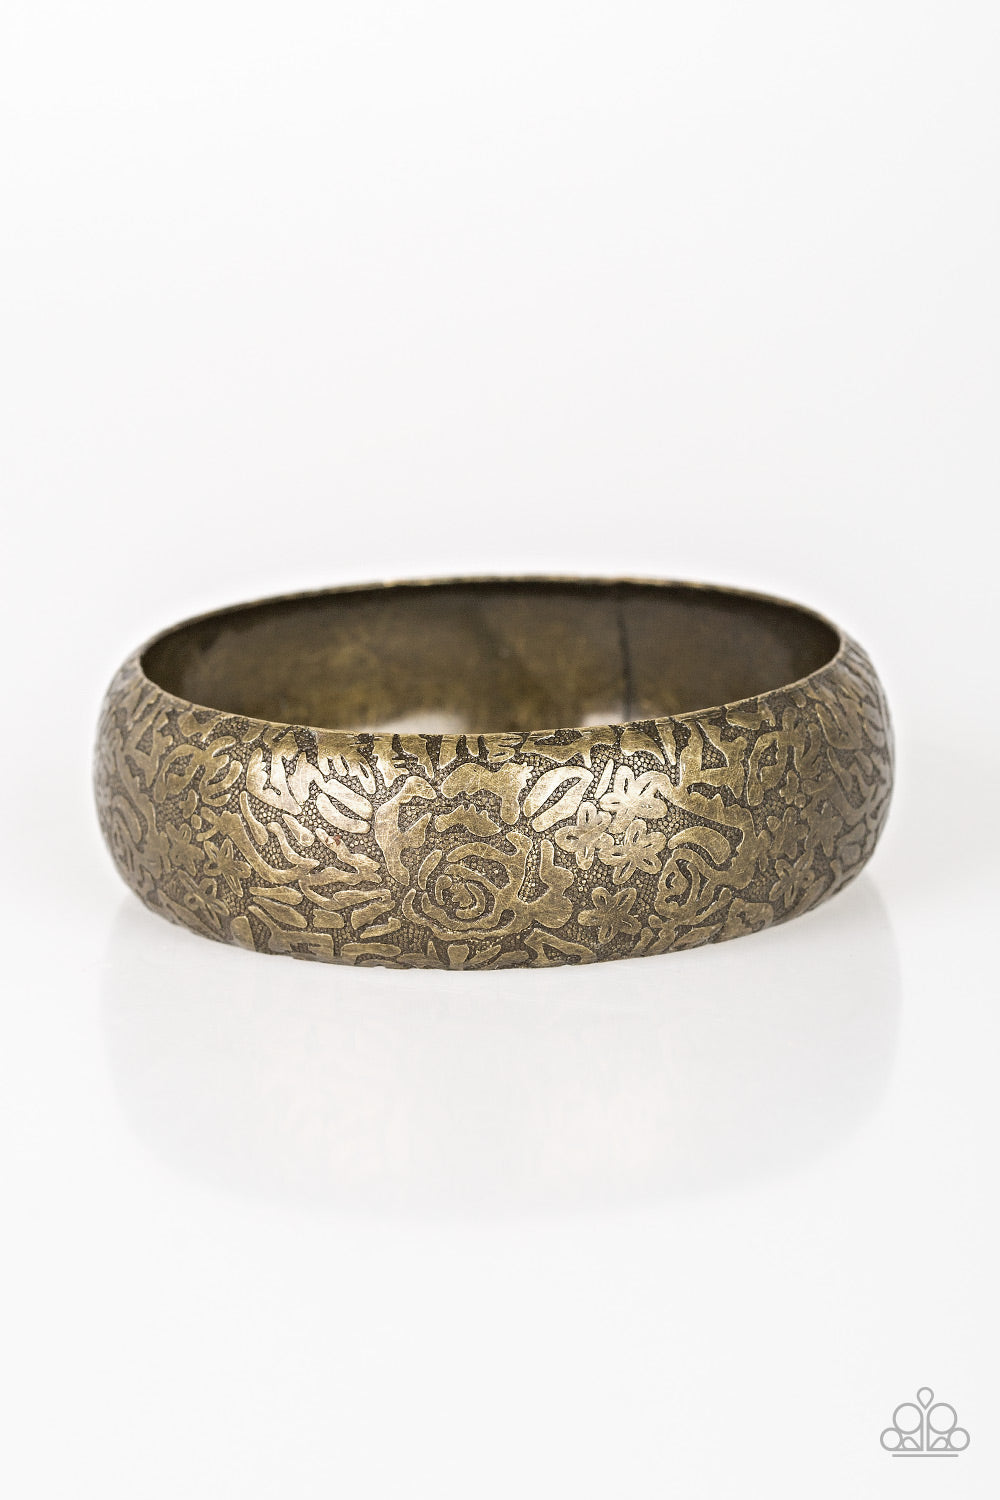 &lt;P&gt;Brushed in an antiqued finish, a rosy floral pattern is embossed across a thick brass bangle for a seasonal flair. &lt;/P&gt;

&lt;P&gt;&lt;I&gt; Sold as one individual bracelet.&lt;/I&gt;&lt;/p&gt;


&lt;img src=\&quot;https://d9b54x484lq62.cloudfront.net/paparazzi/shopping/images/517_tag150x115_1.png\&quot; alt=\&quot;New Kit\&quot; align=\&quot;middle\&quot; height=\&quot;50\&quot; width=\&quot;50\&quot;/&gt;